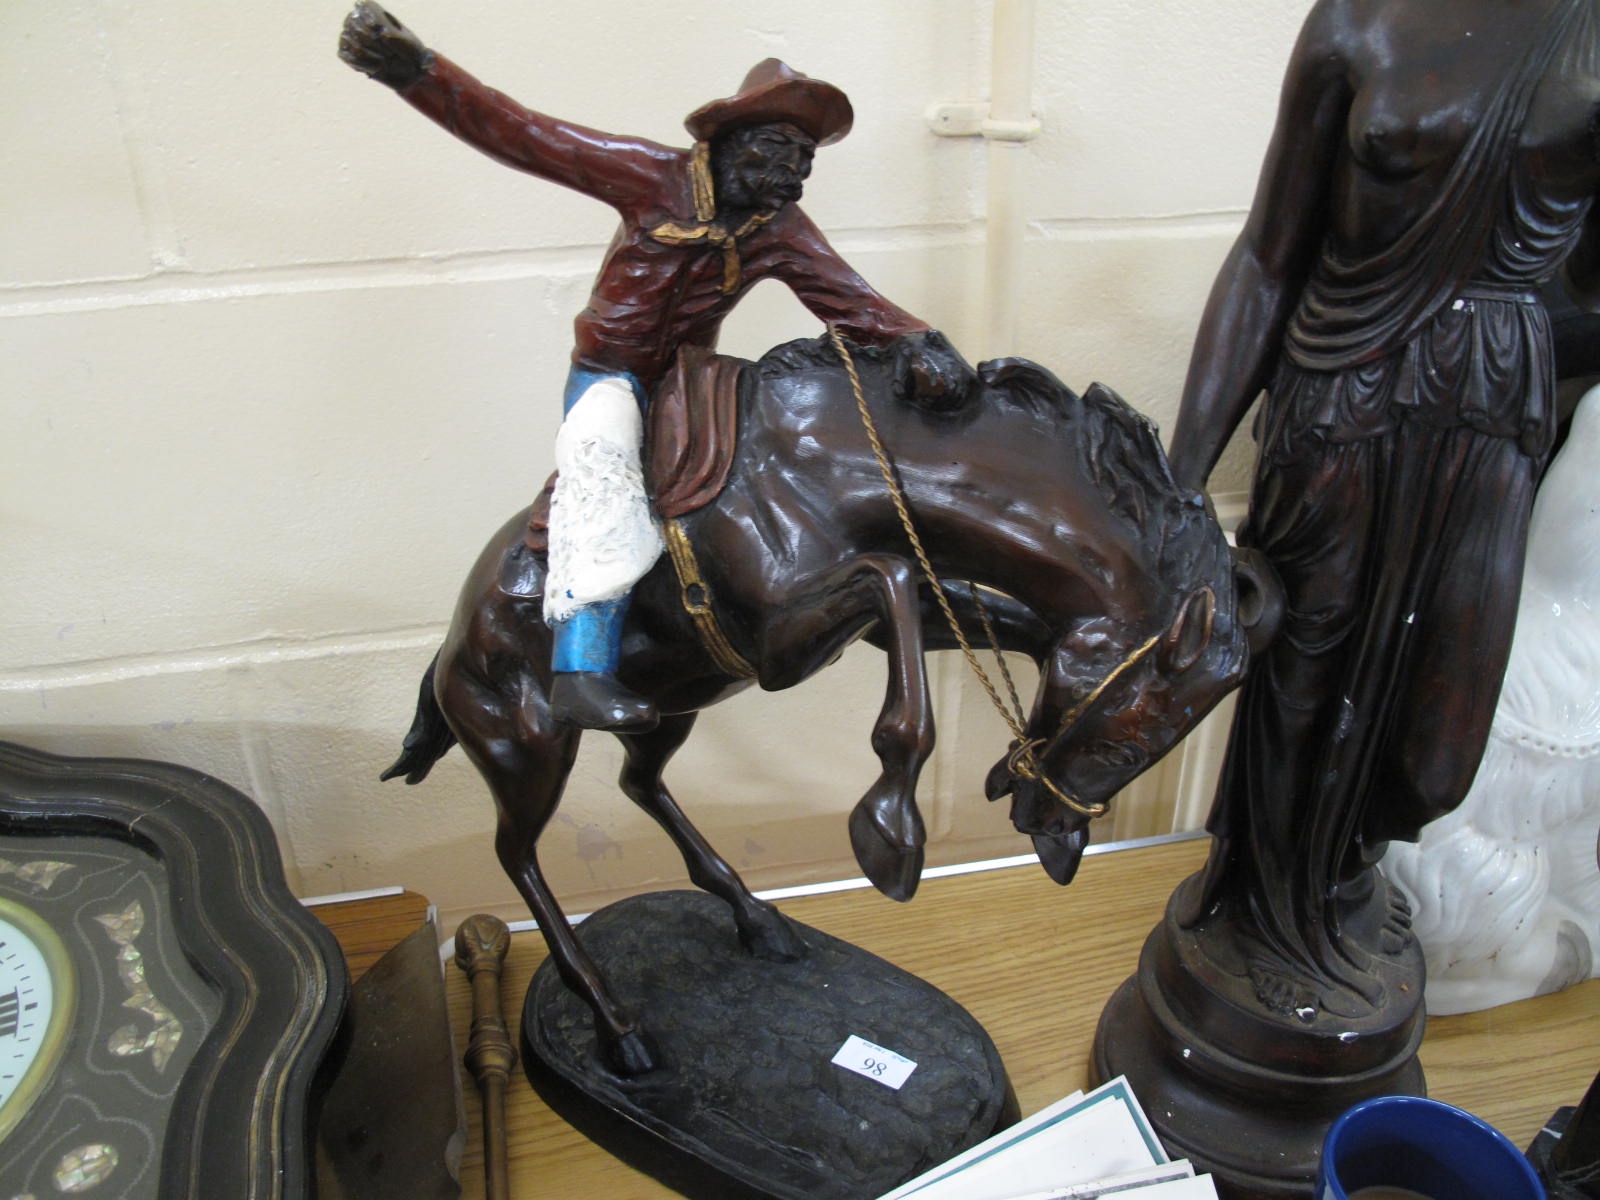 Lot 89 - Bronze of rodeo cowboy on horse - Sold for £40